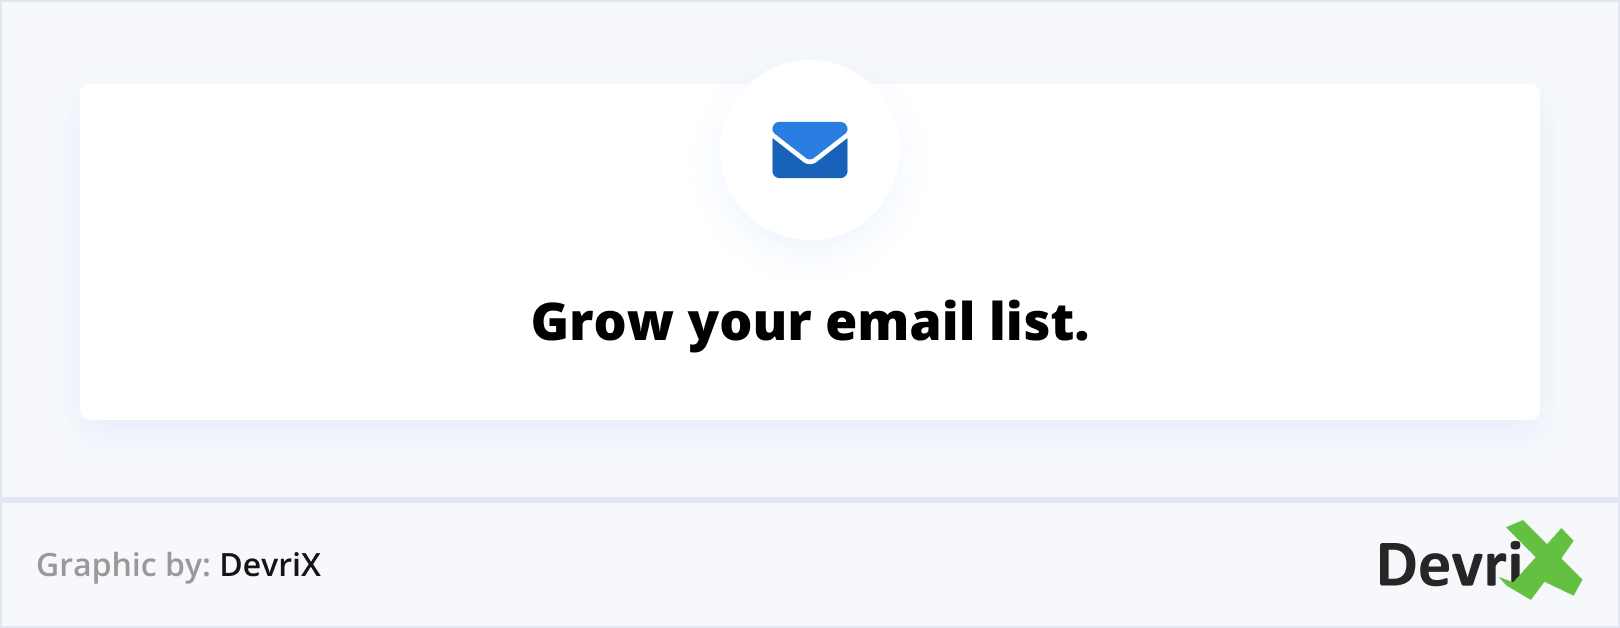 Grow your email list.